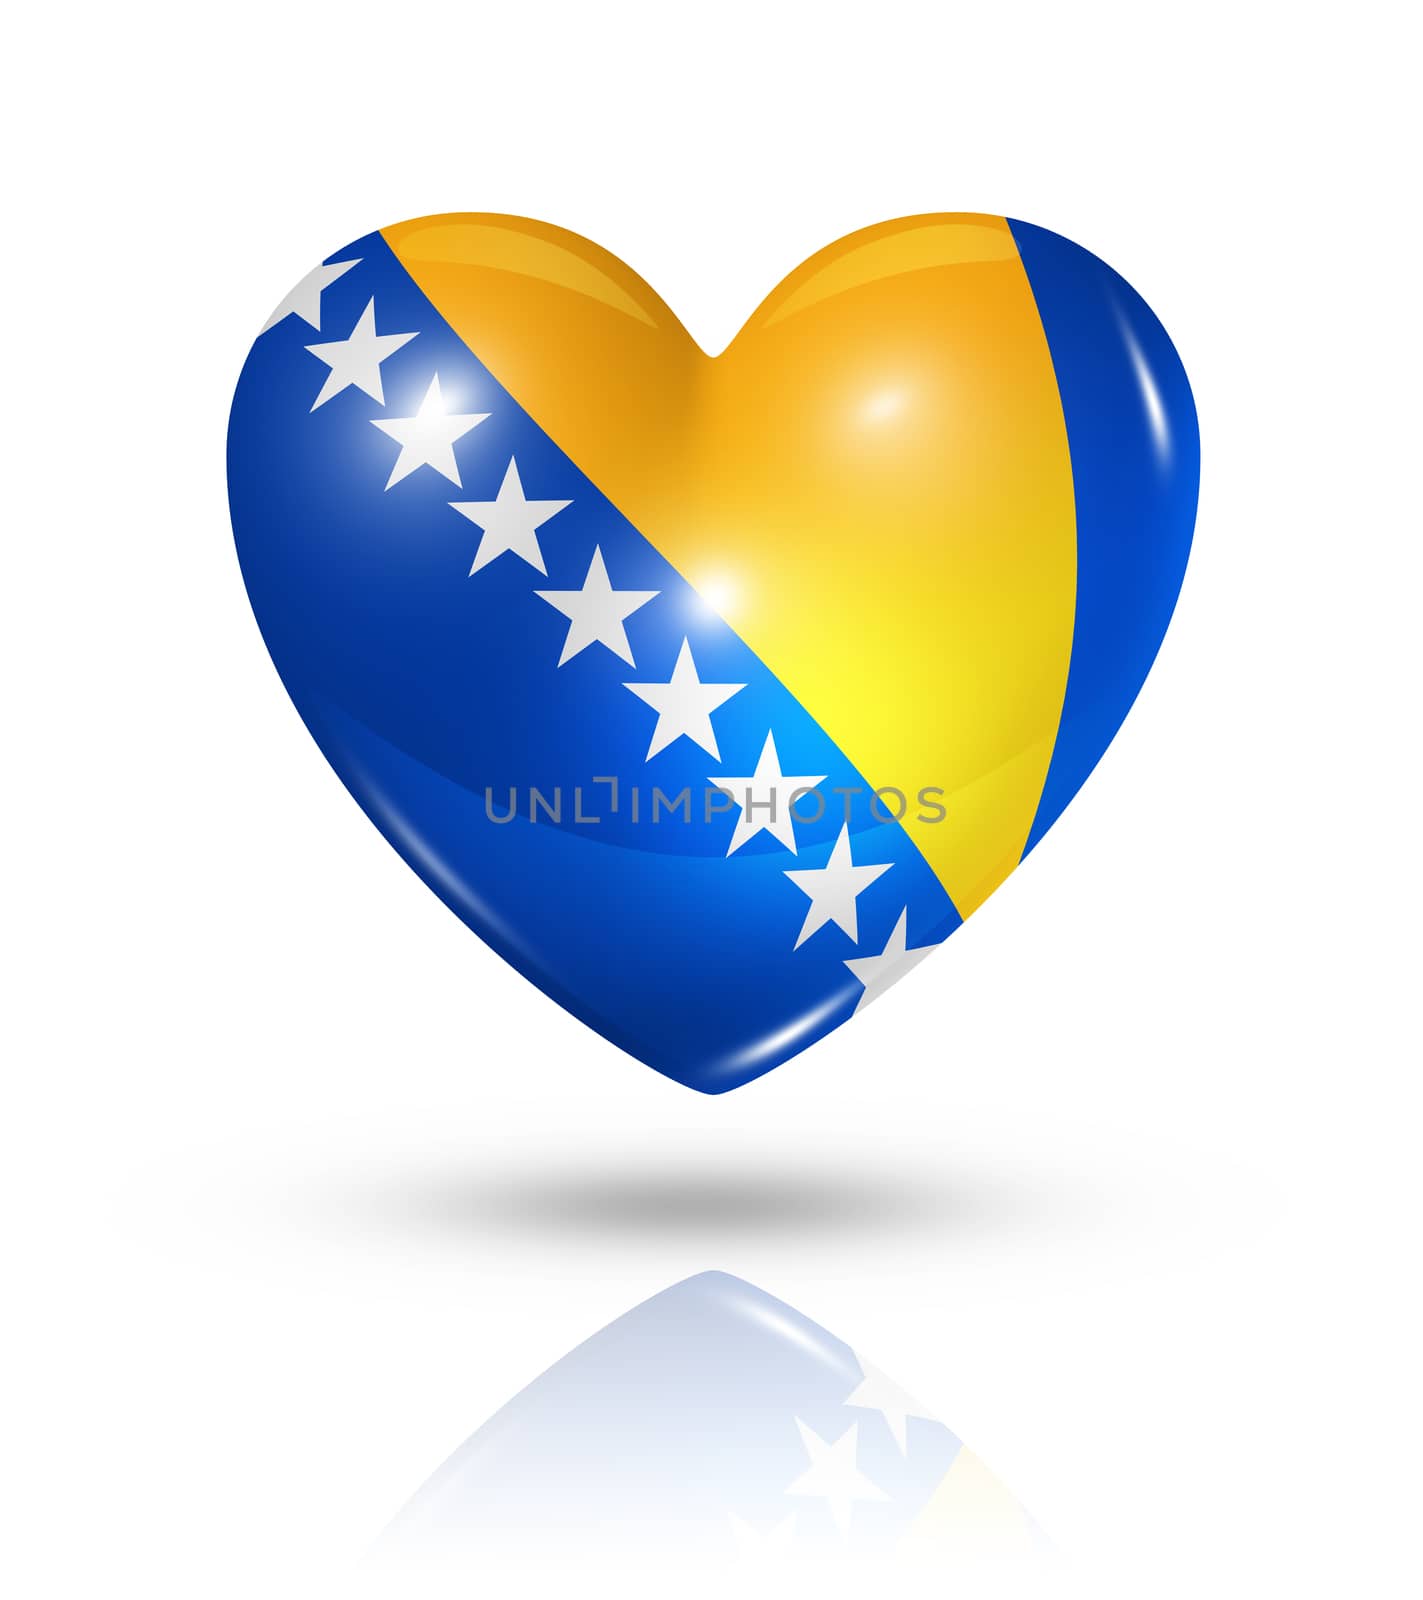 Love Bosnia and Herzegovina symbol. 3D heart flag icon isolated on white with clipping path